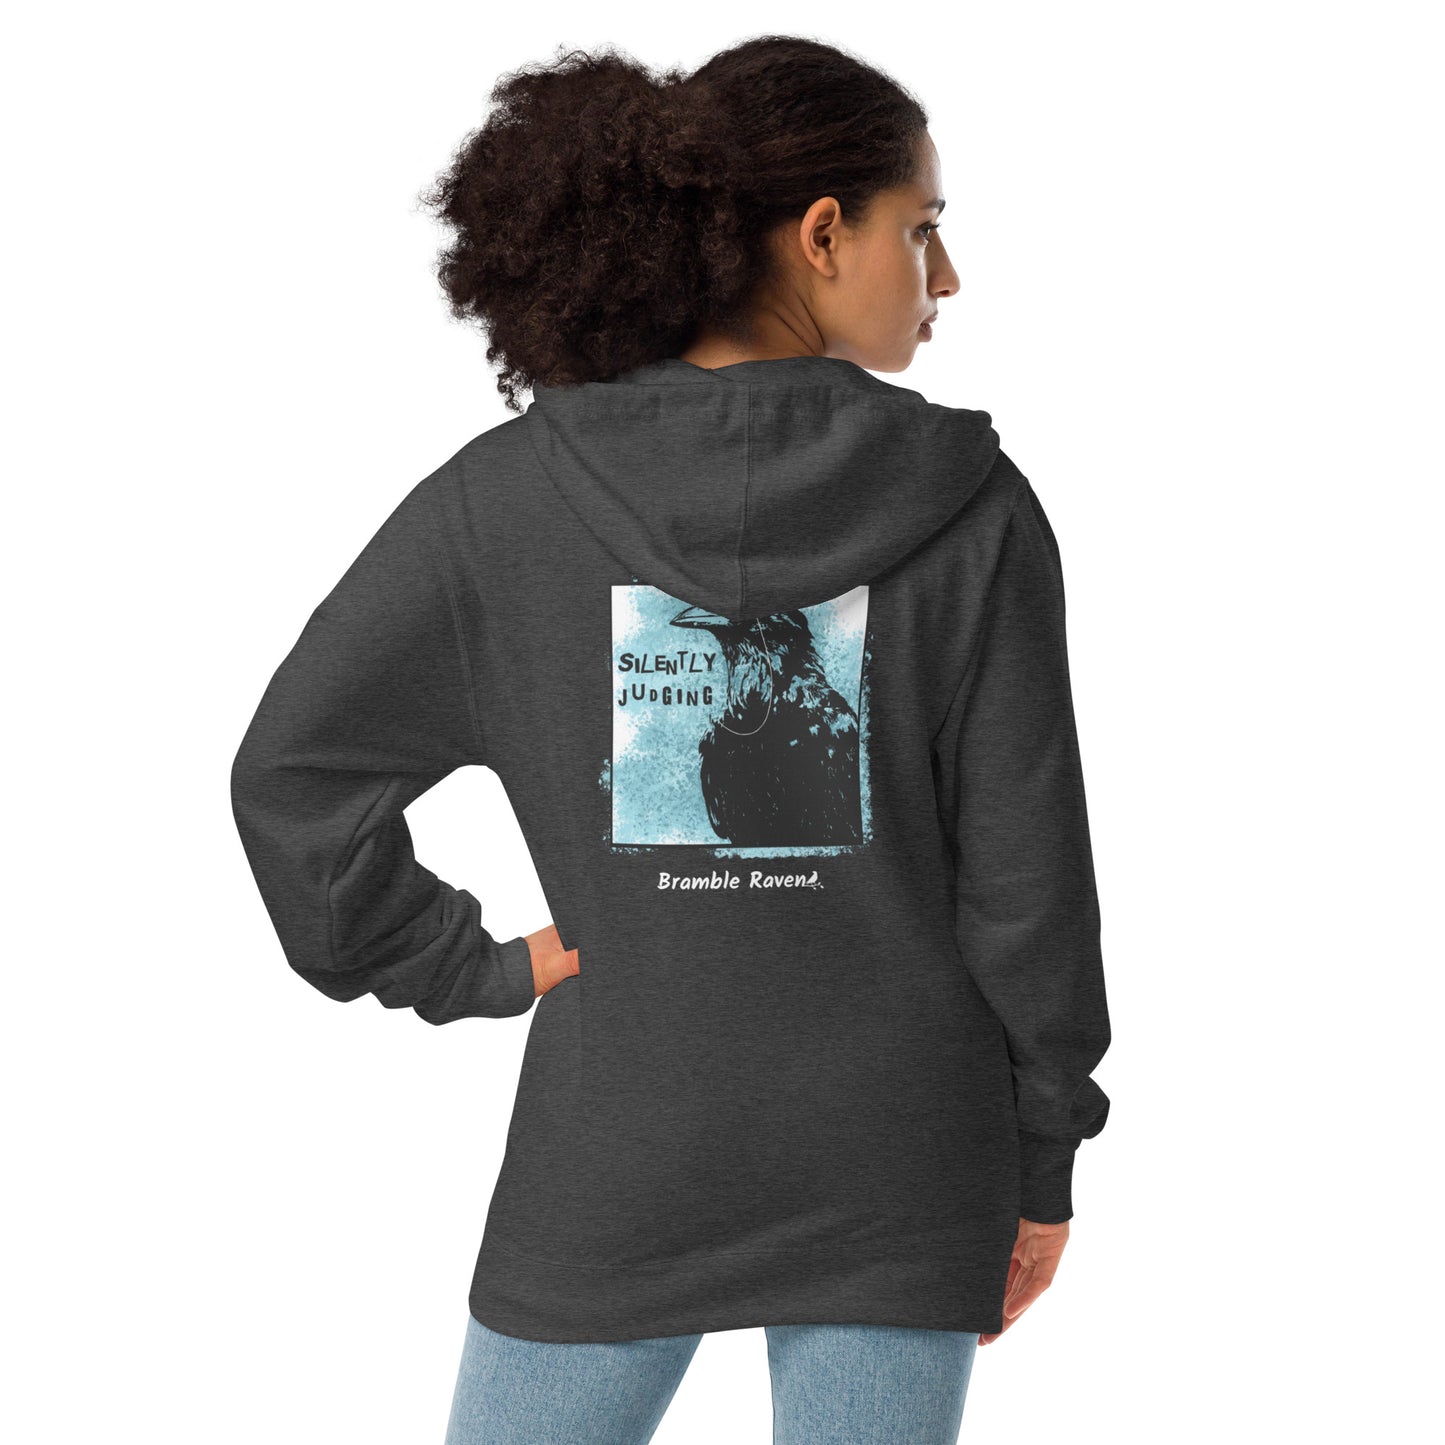 Unisex fleece-lined charcoal heather grey colored zip-up hoodie with silently judging text by black crow wearing a monocle in a square with blue paint splatters.  Design on the back of hoodie. Shown on female model.